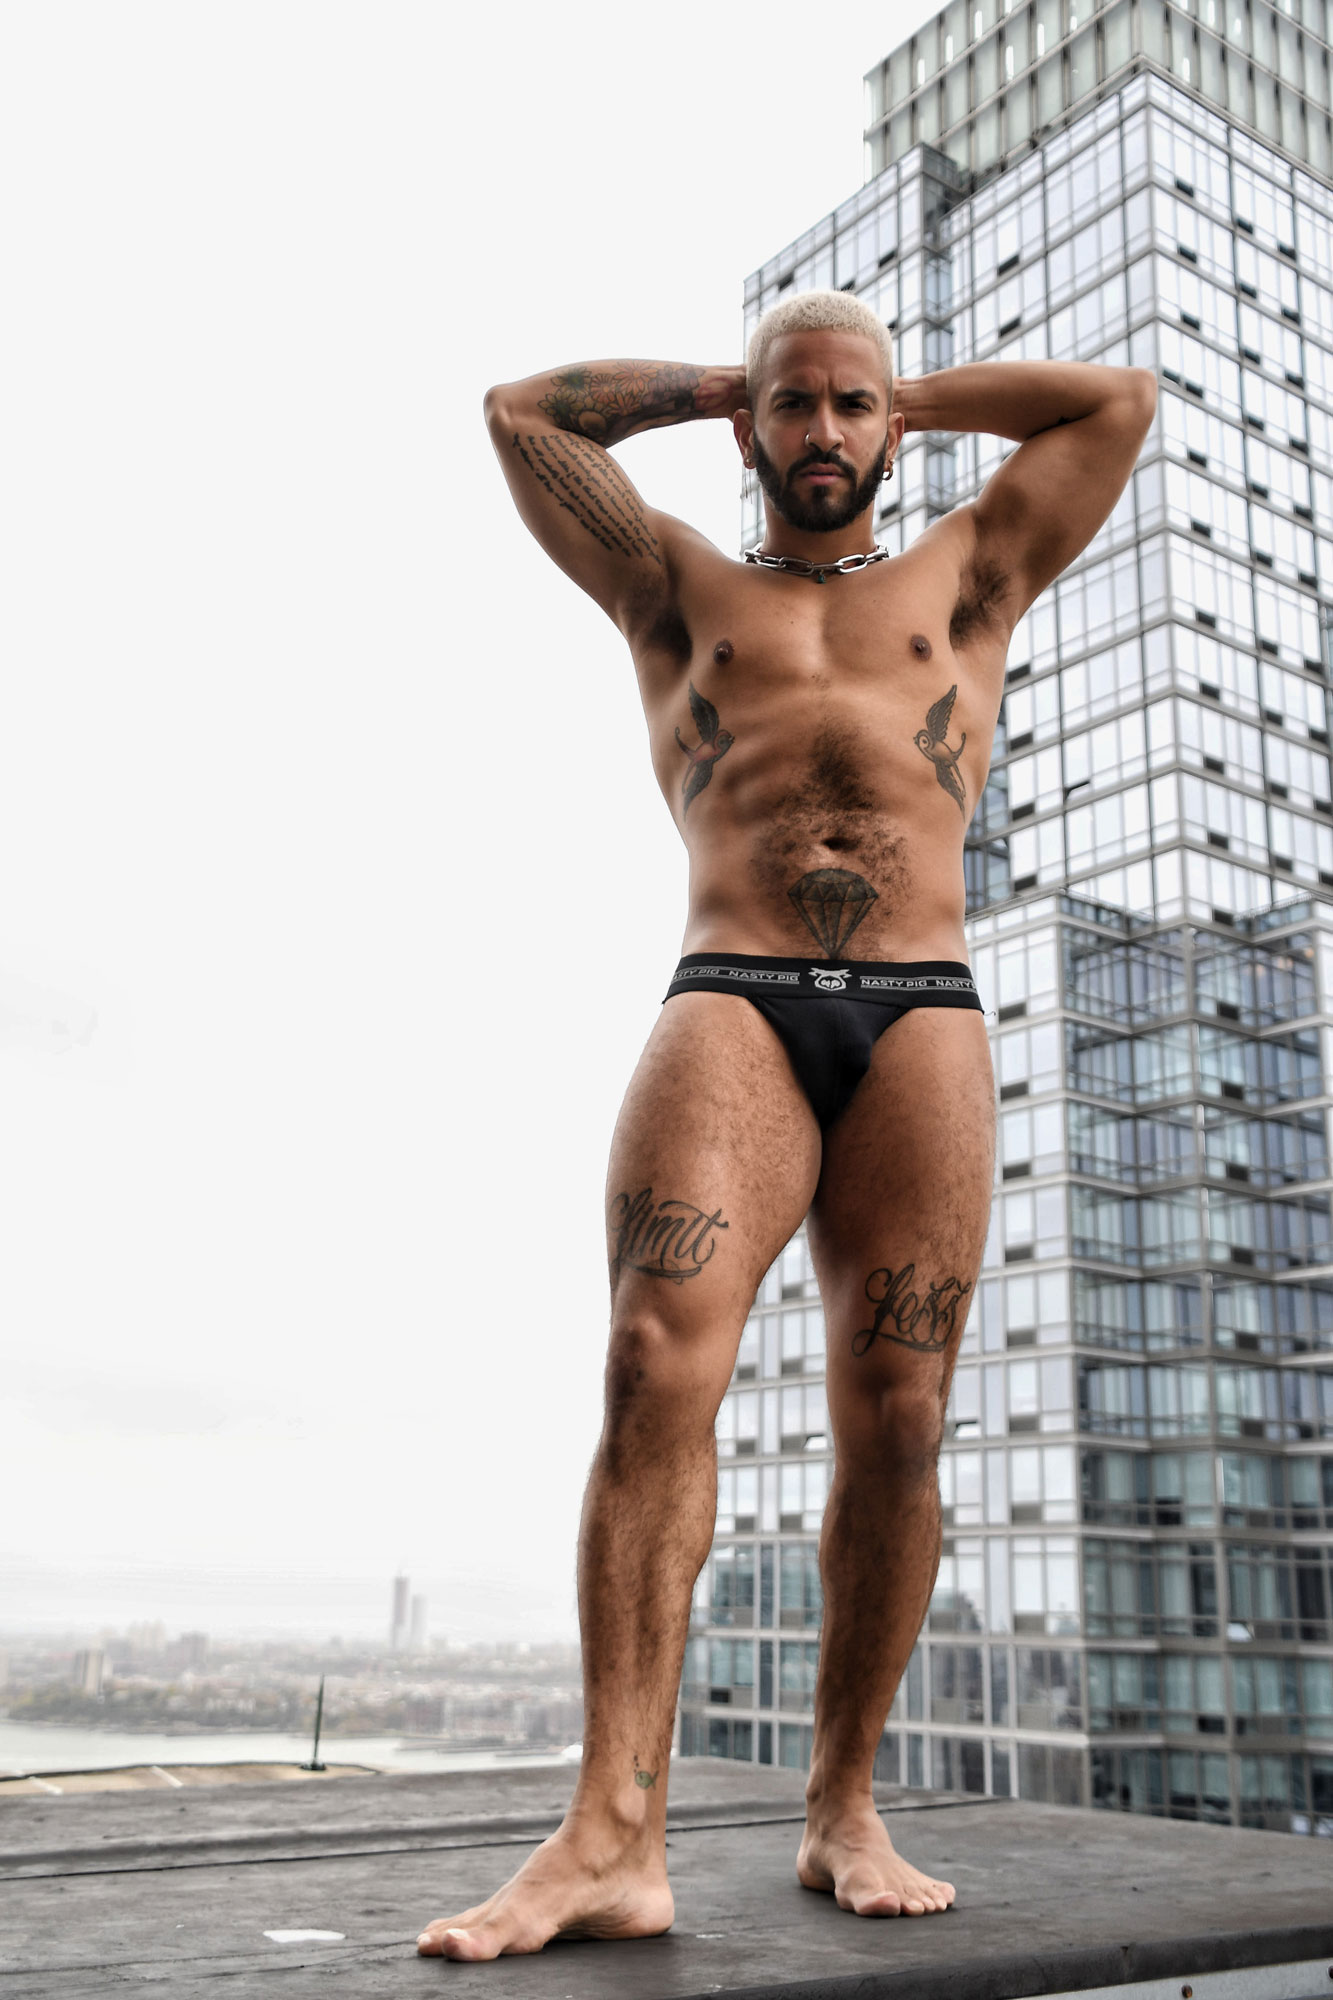 – EXCLUSIVE – EXPLICIT CONTENT – Xavier Blanco by Sergey Sheptun.